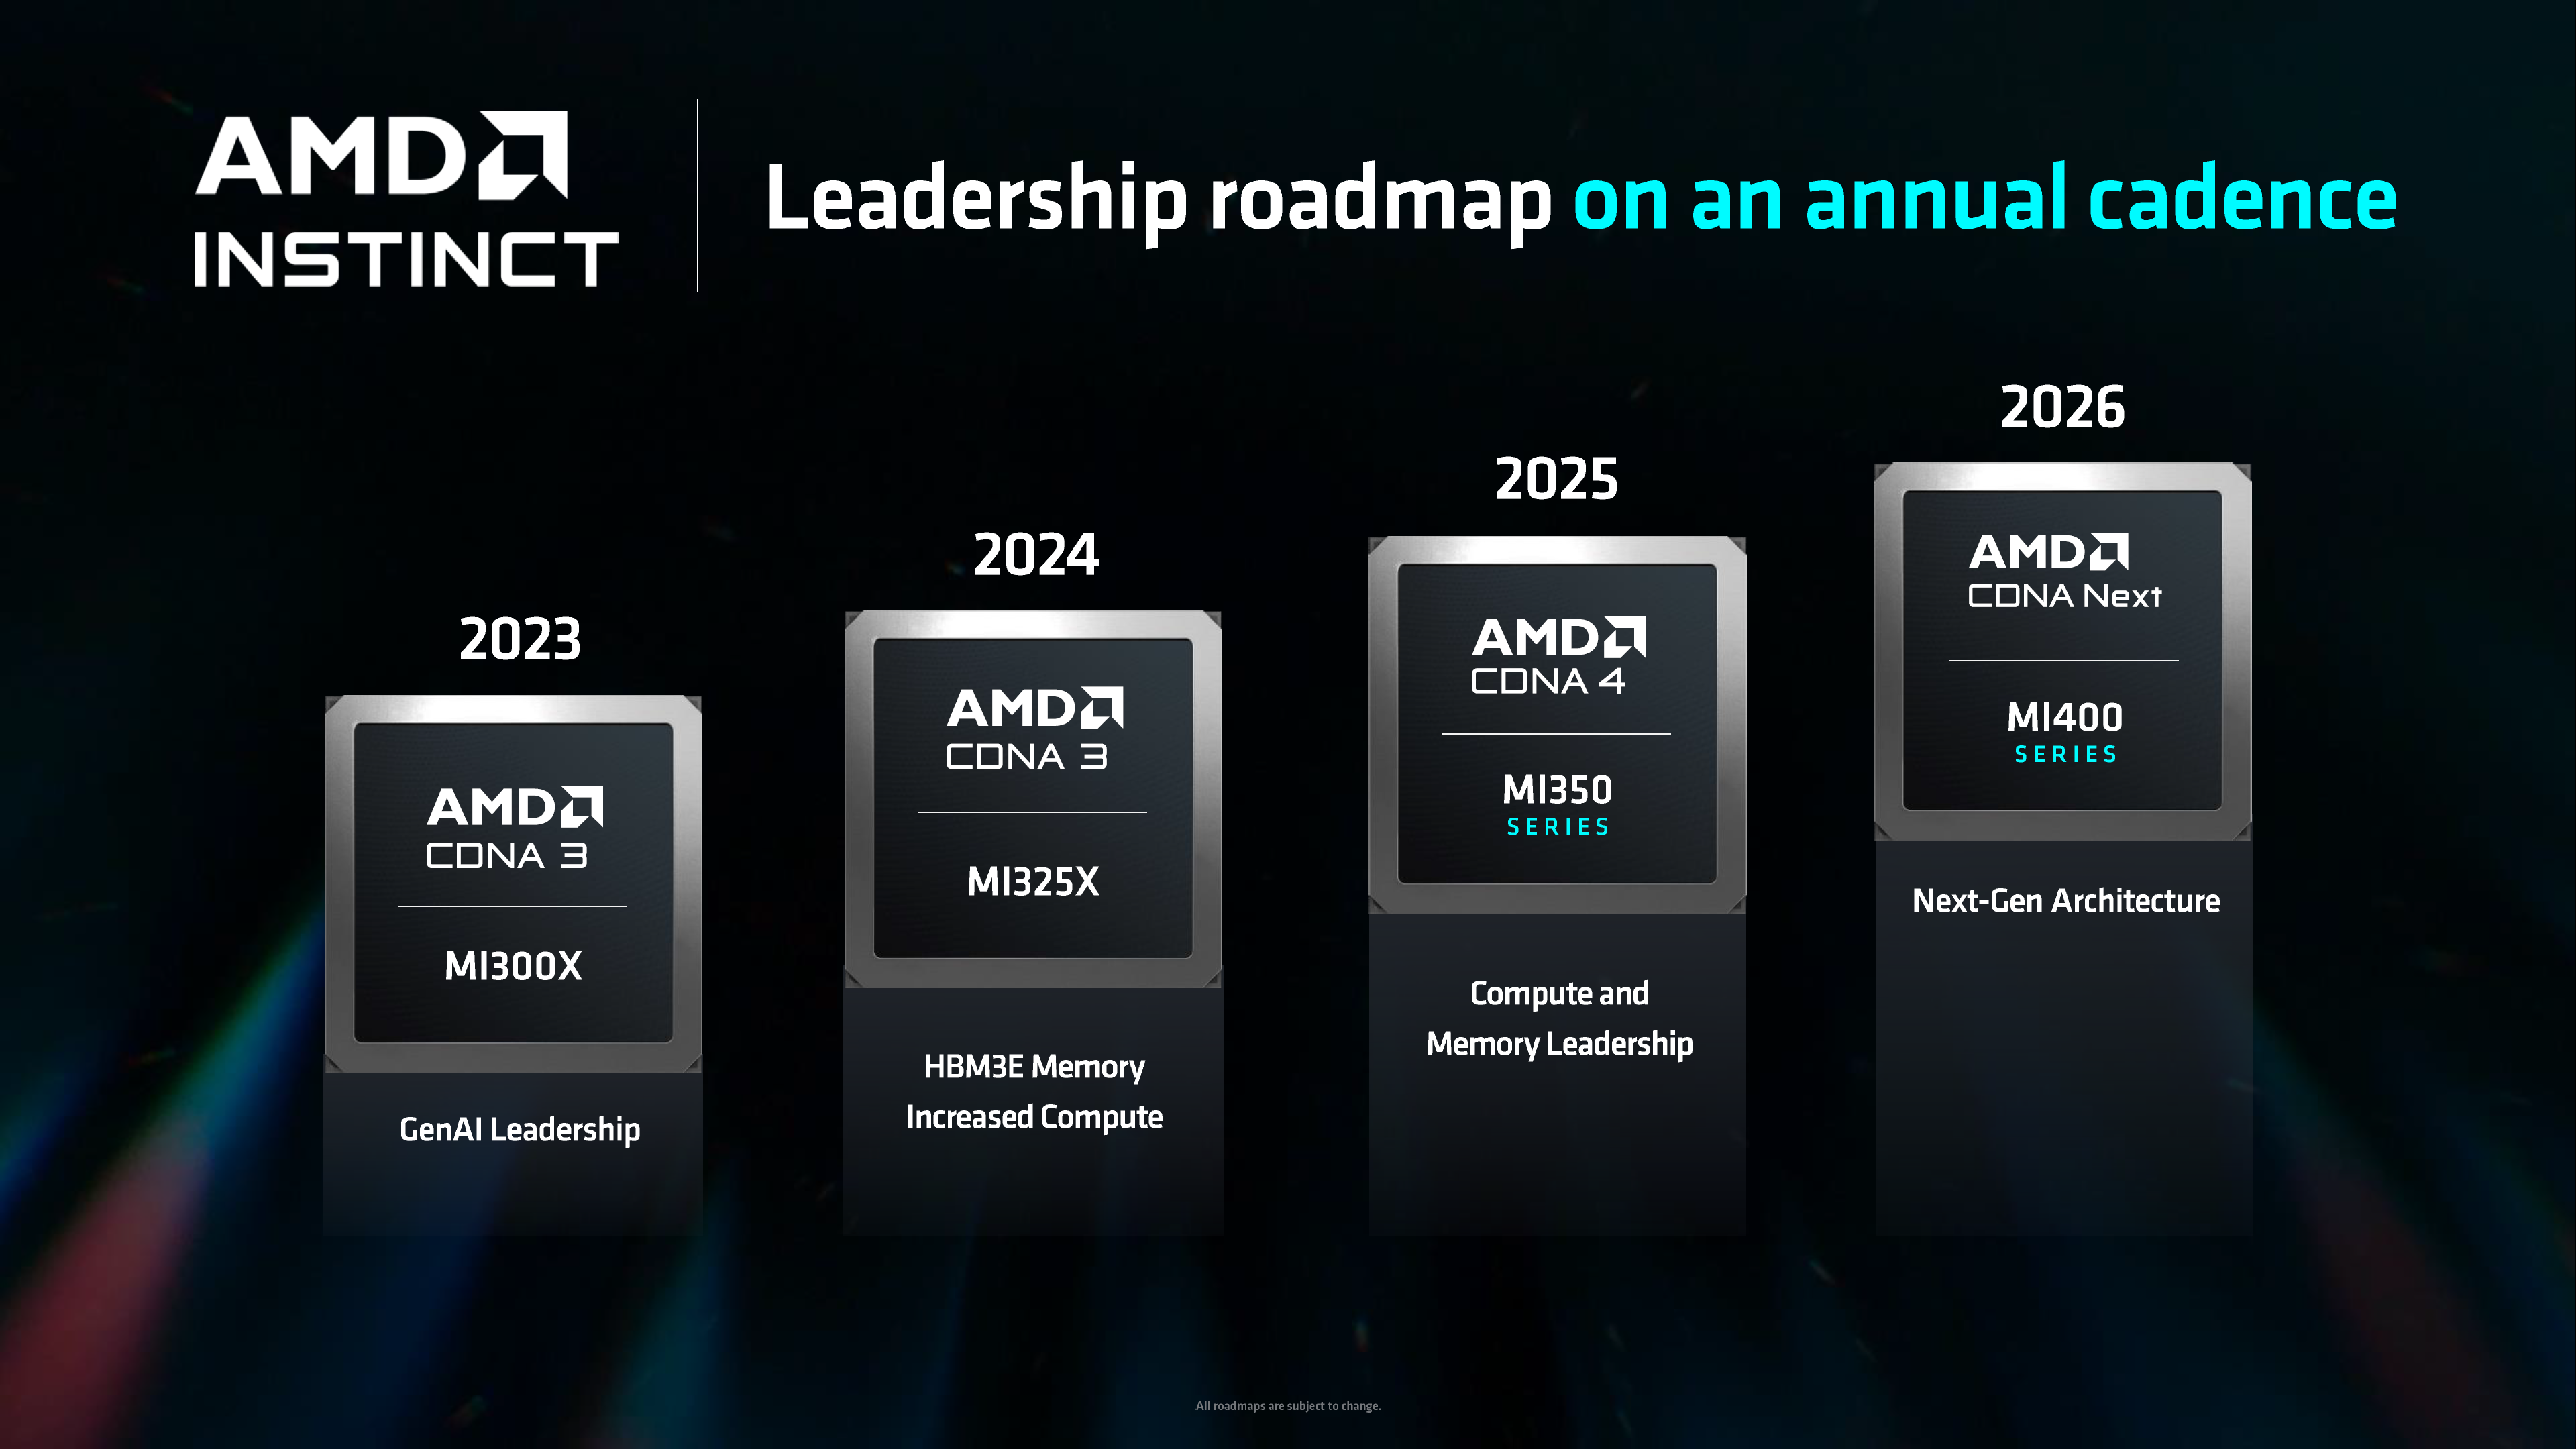 AMD's Instnct AI accelertors are a key product in the AI industry